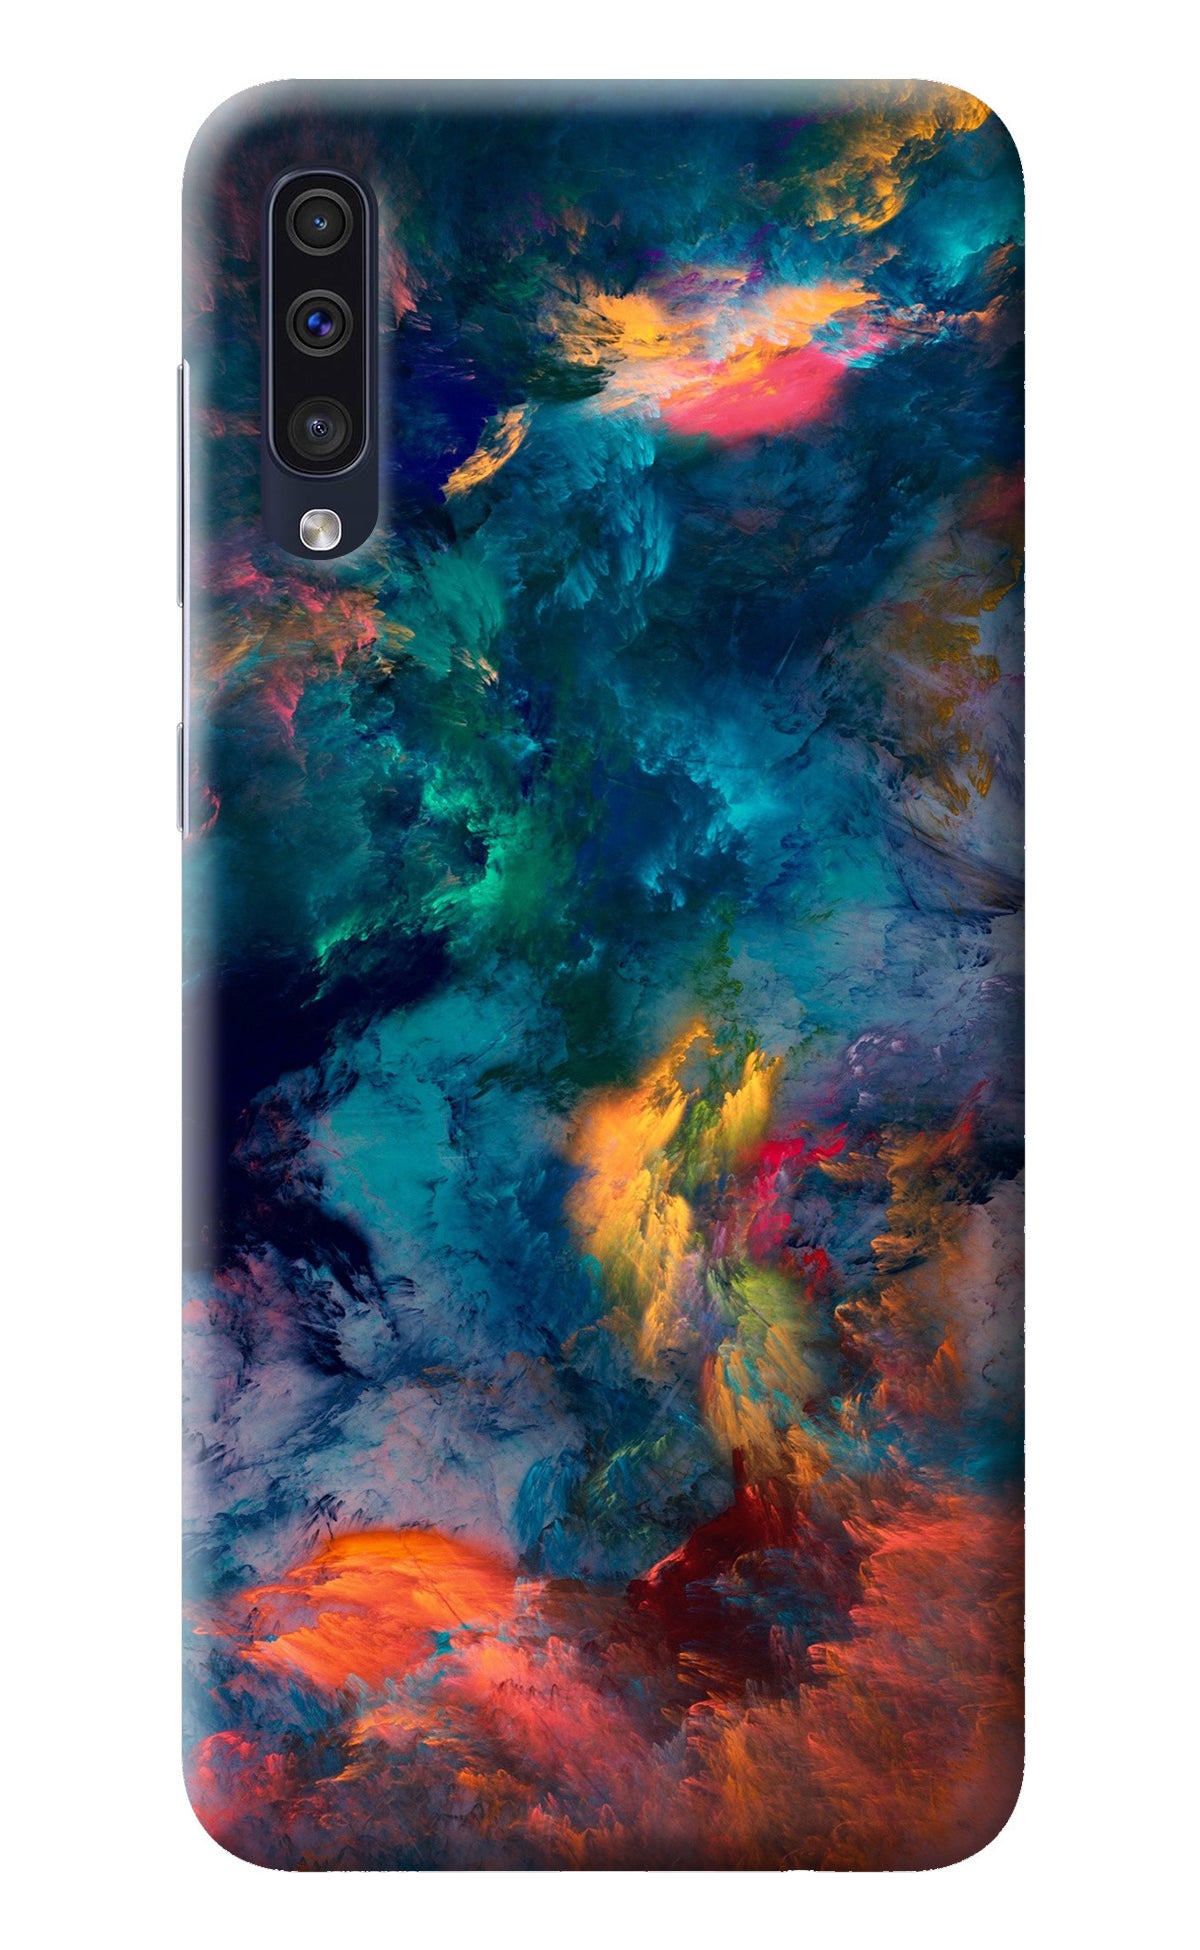 Artwork Paint Samsung A50/A50s/A30s Back Cover